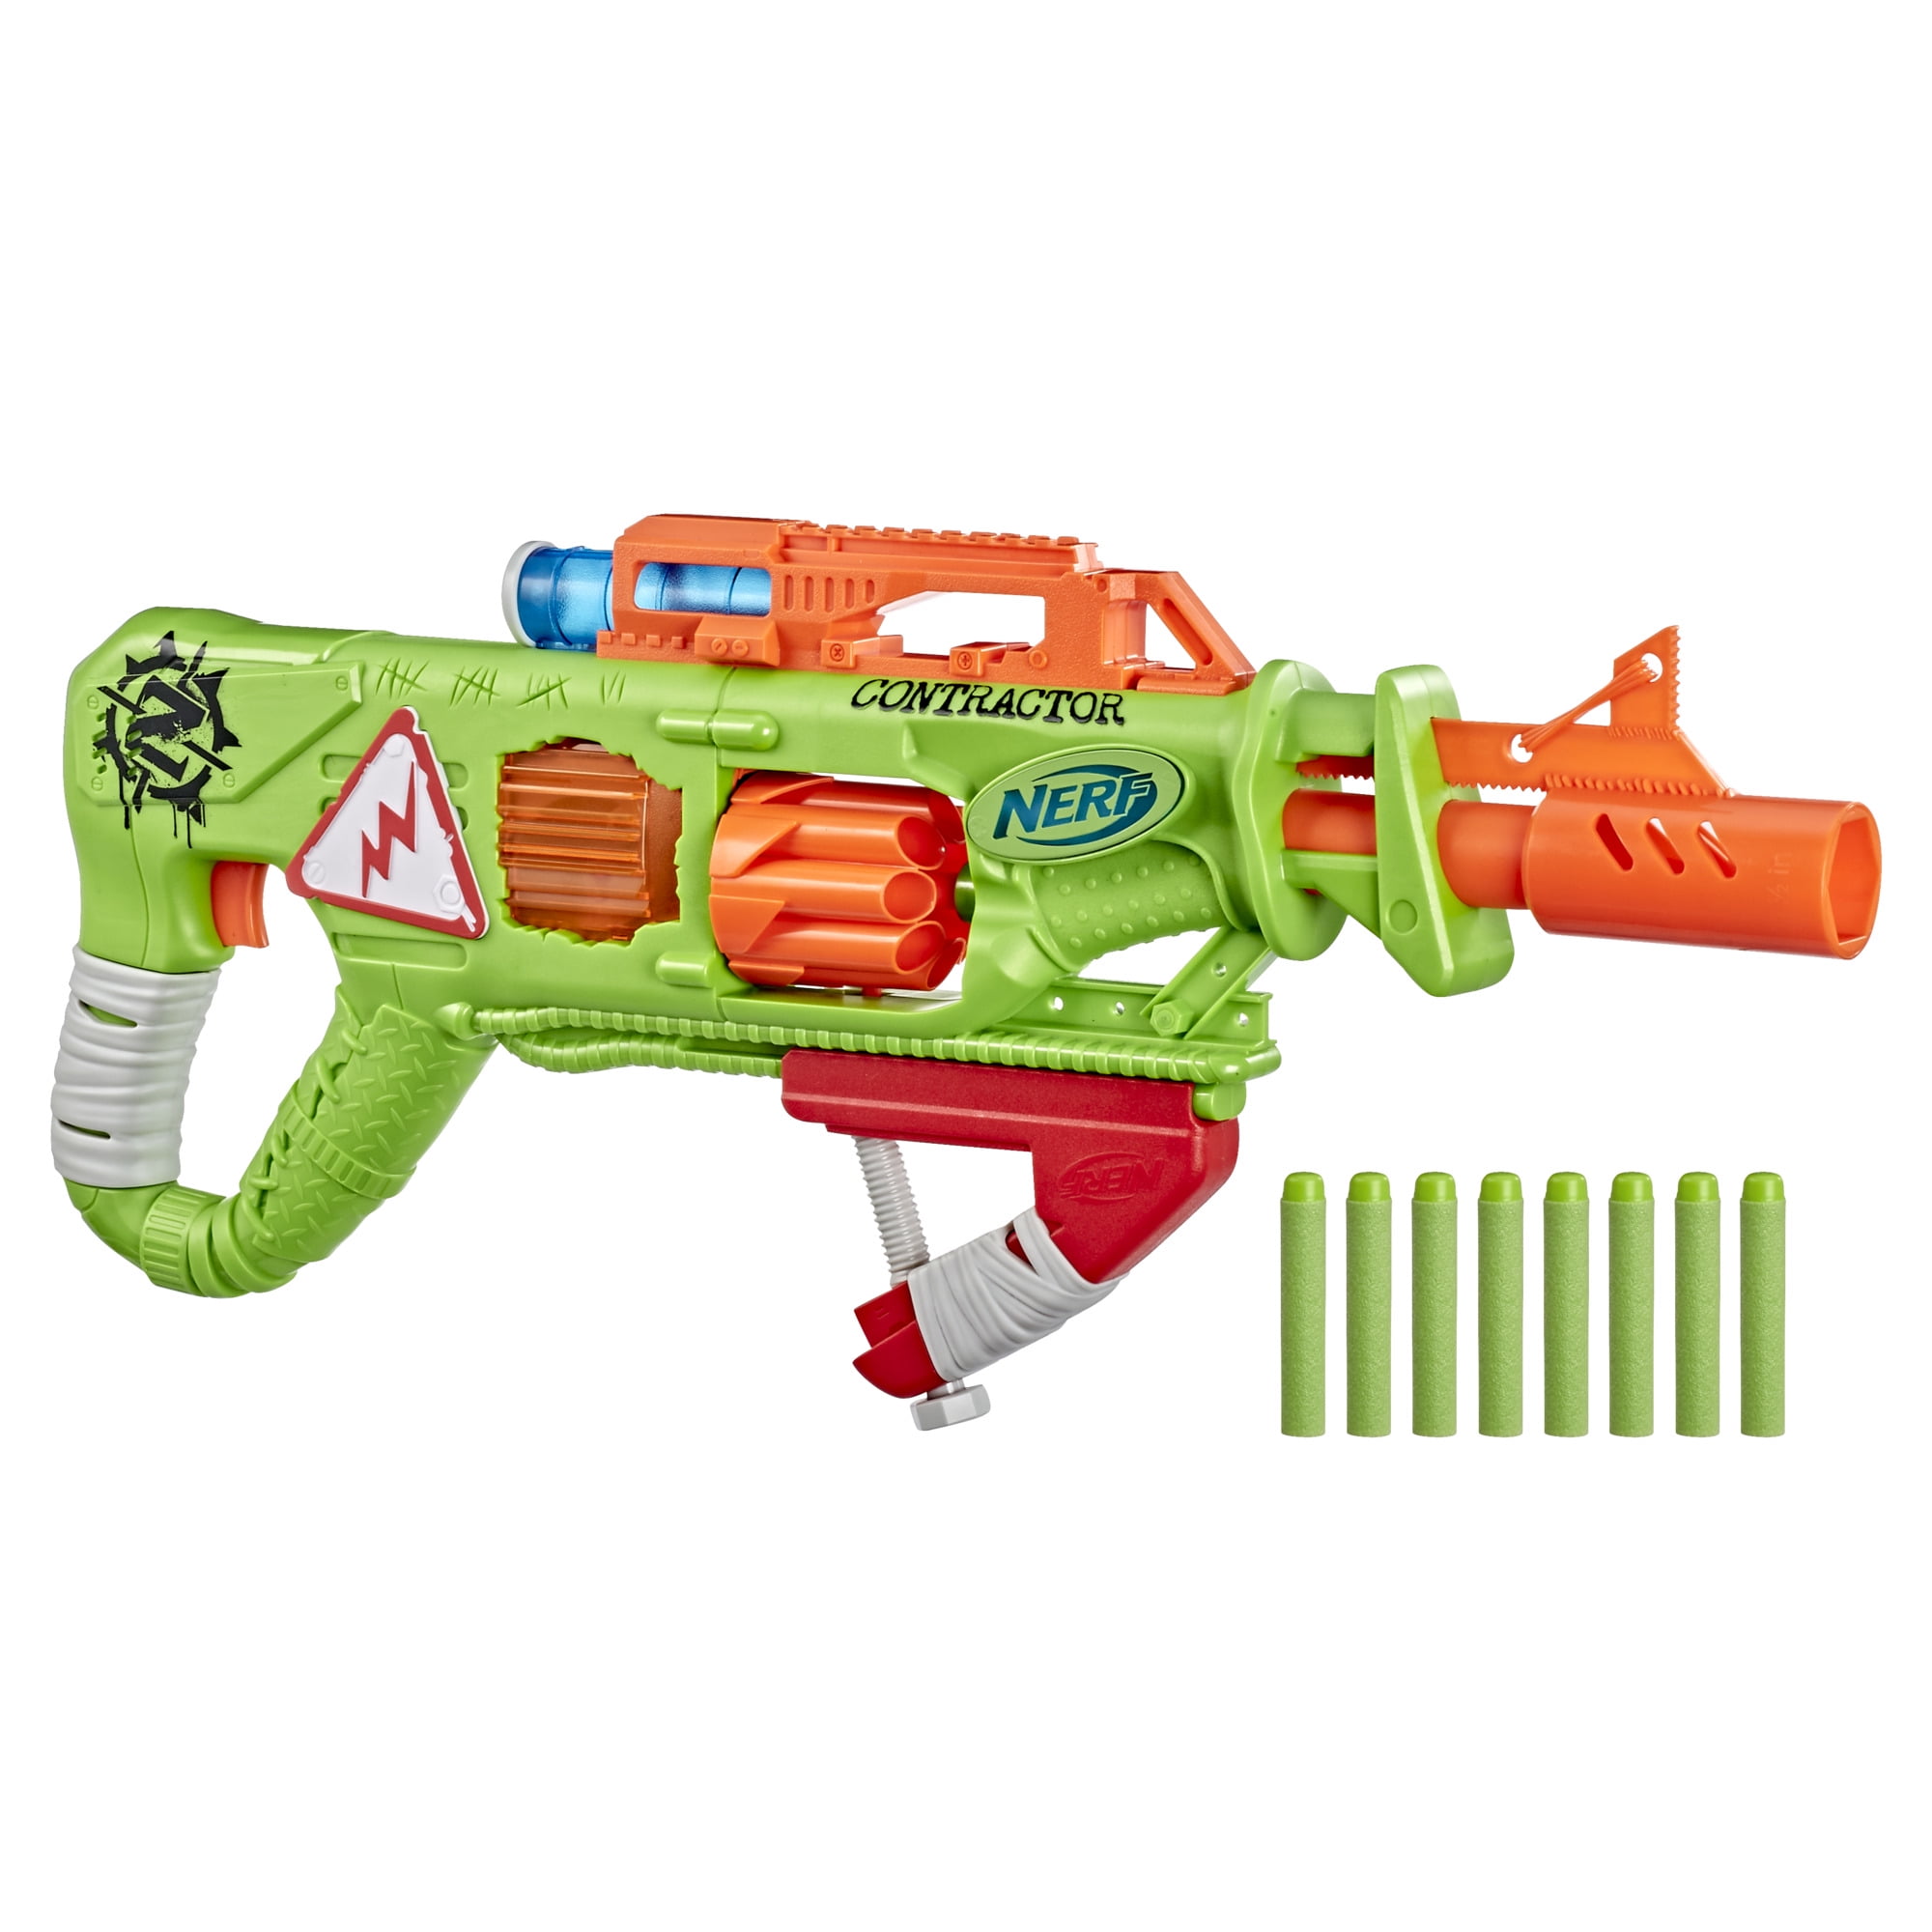 Nerf Zombie Mask's Code & Price - RblxTrade